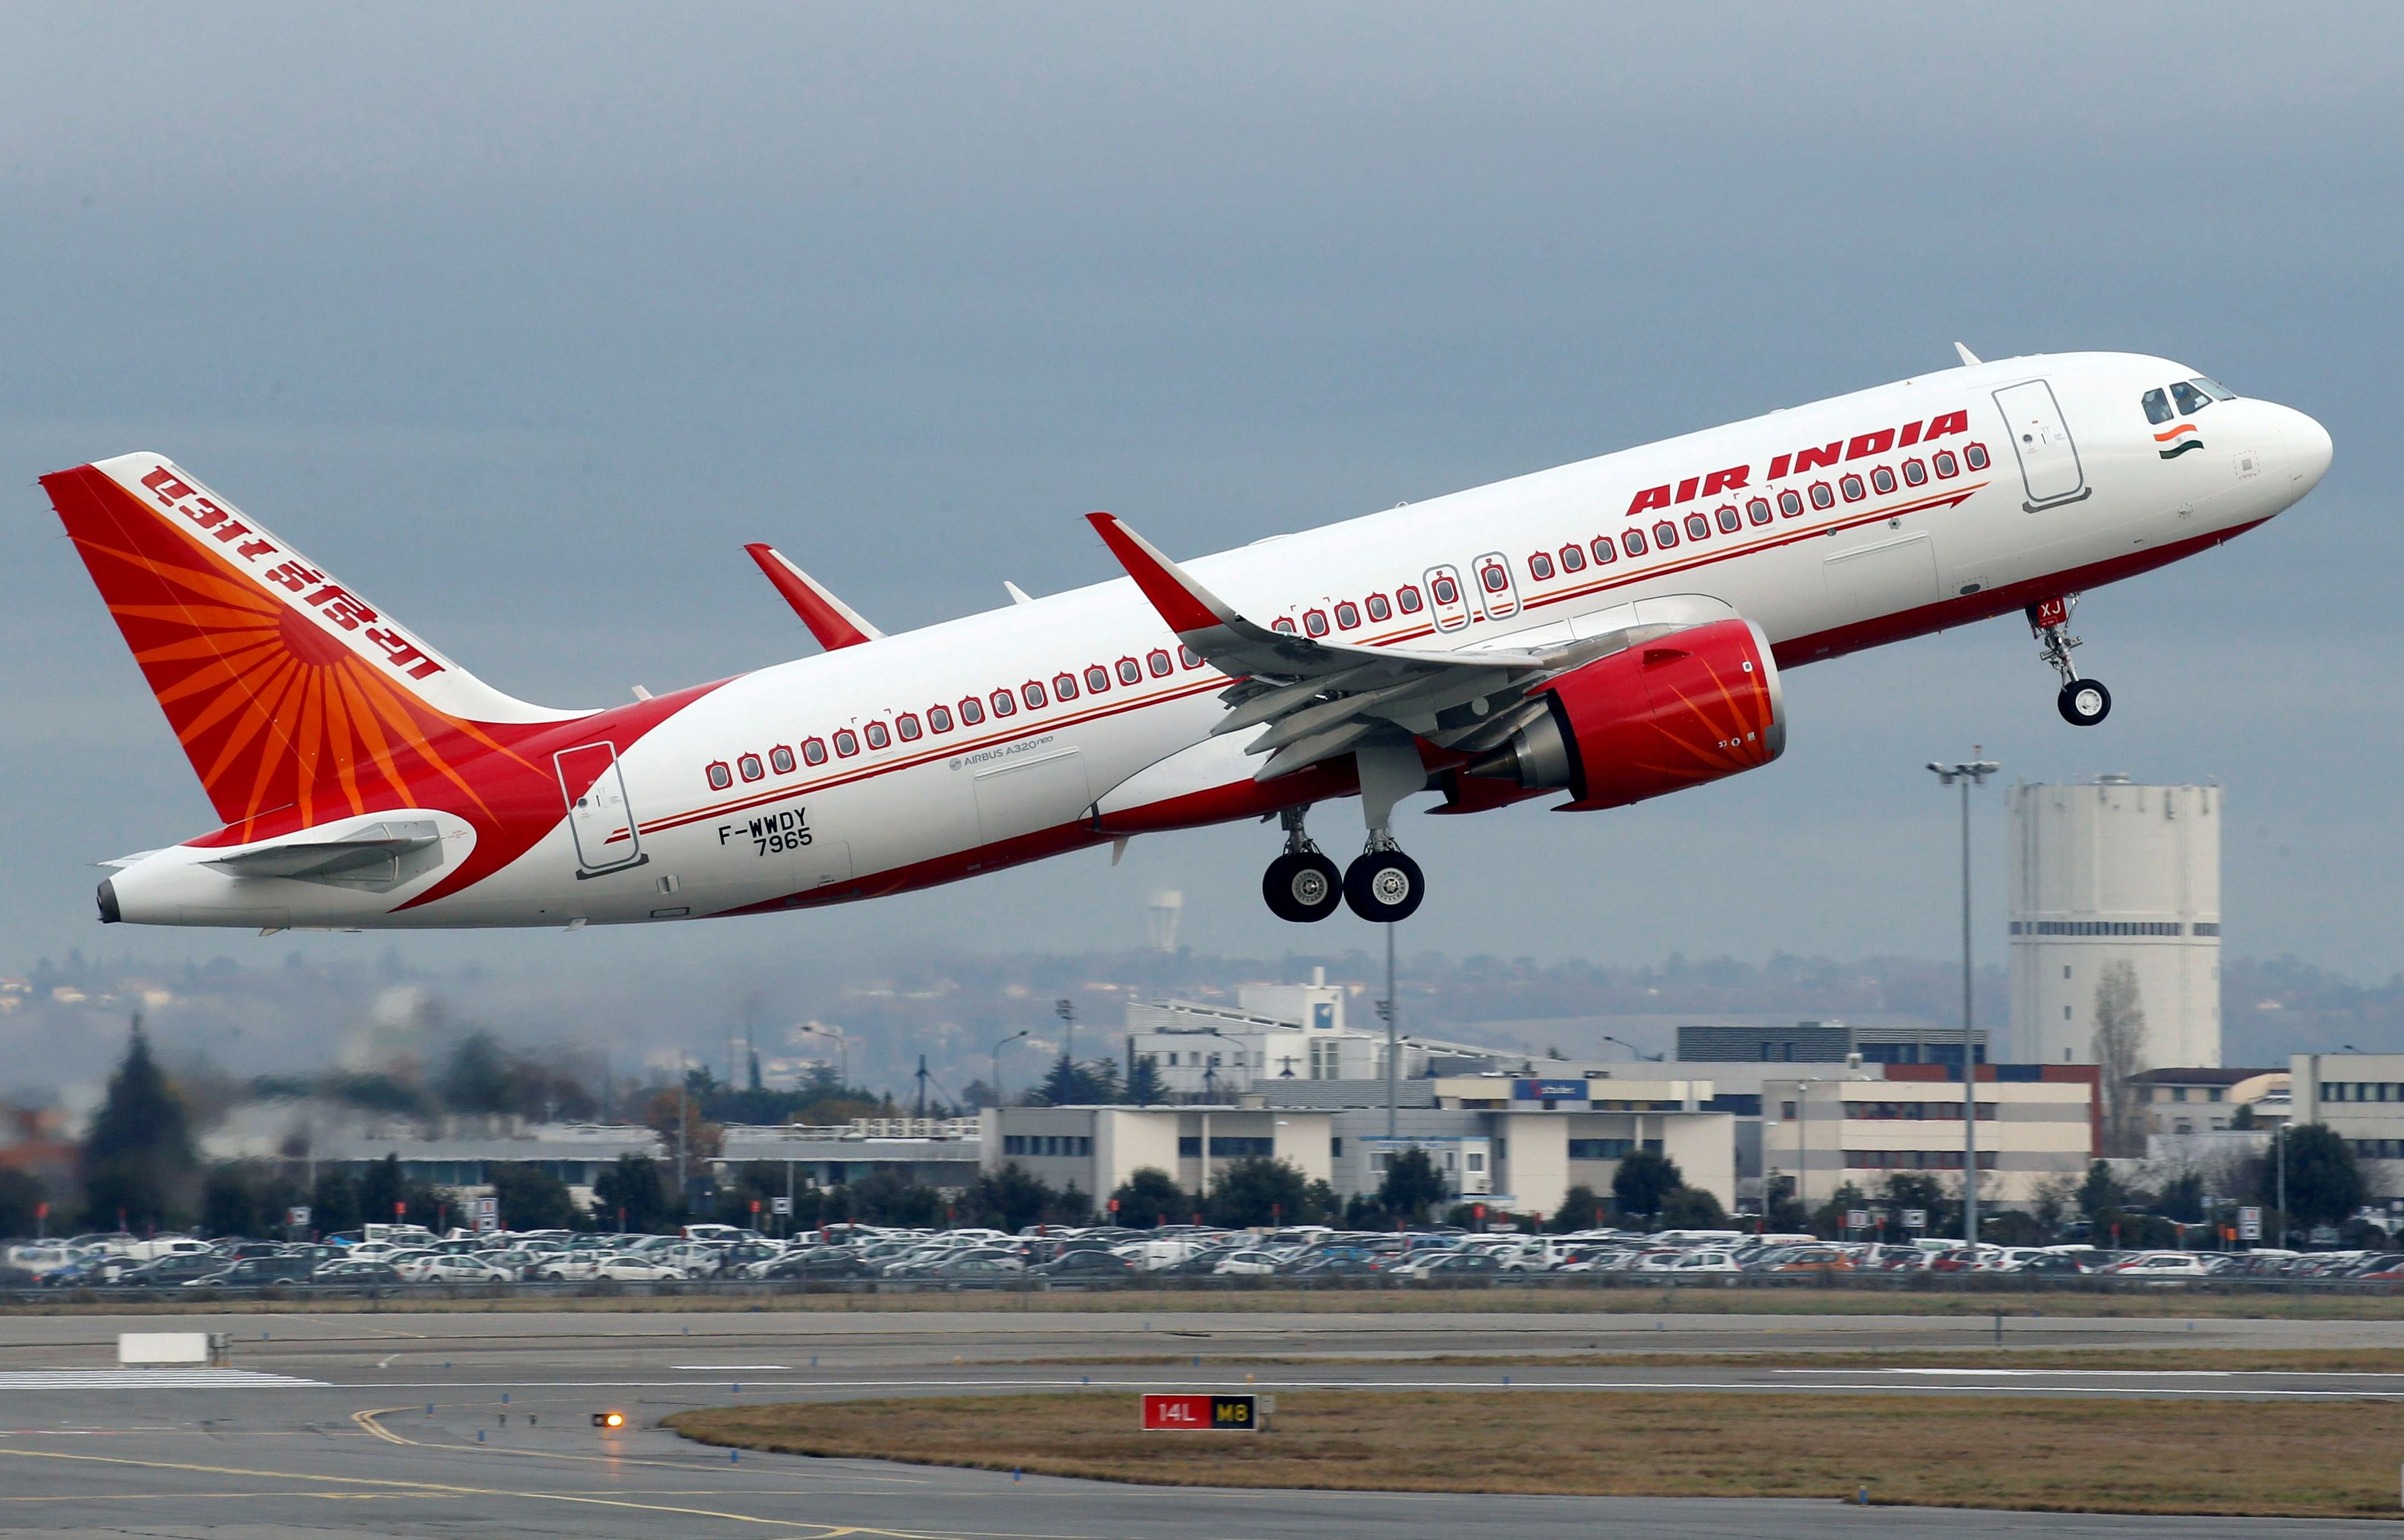  An Air India Airbus A320neo plane takes off in Colomiers near Toulouse, France. (Credit: Reuters Photo)